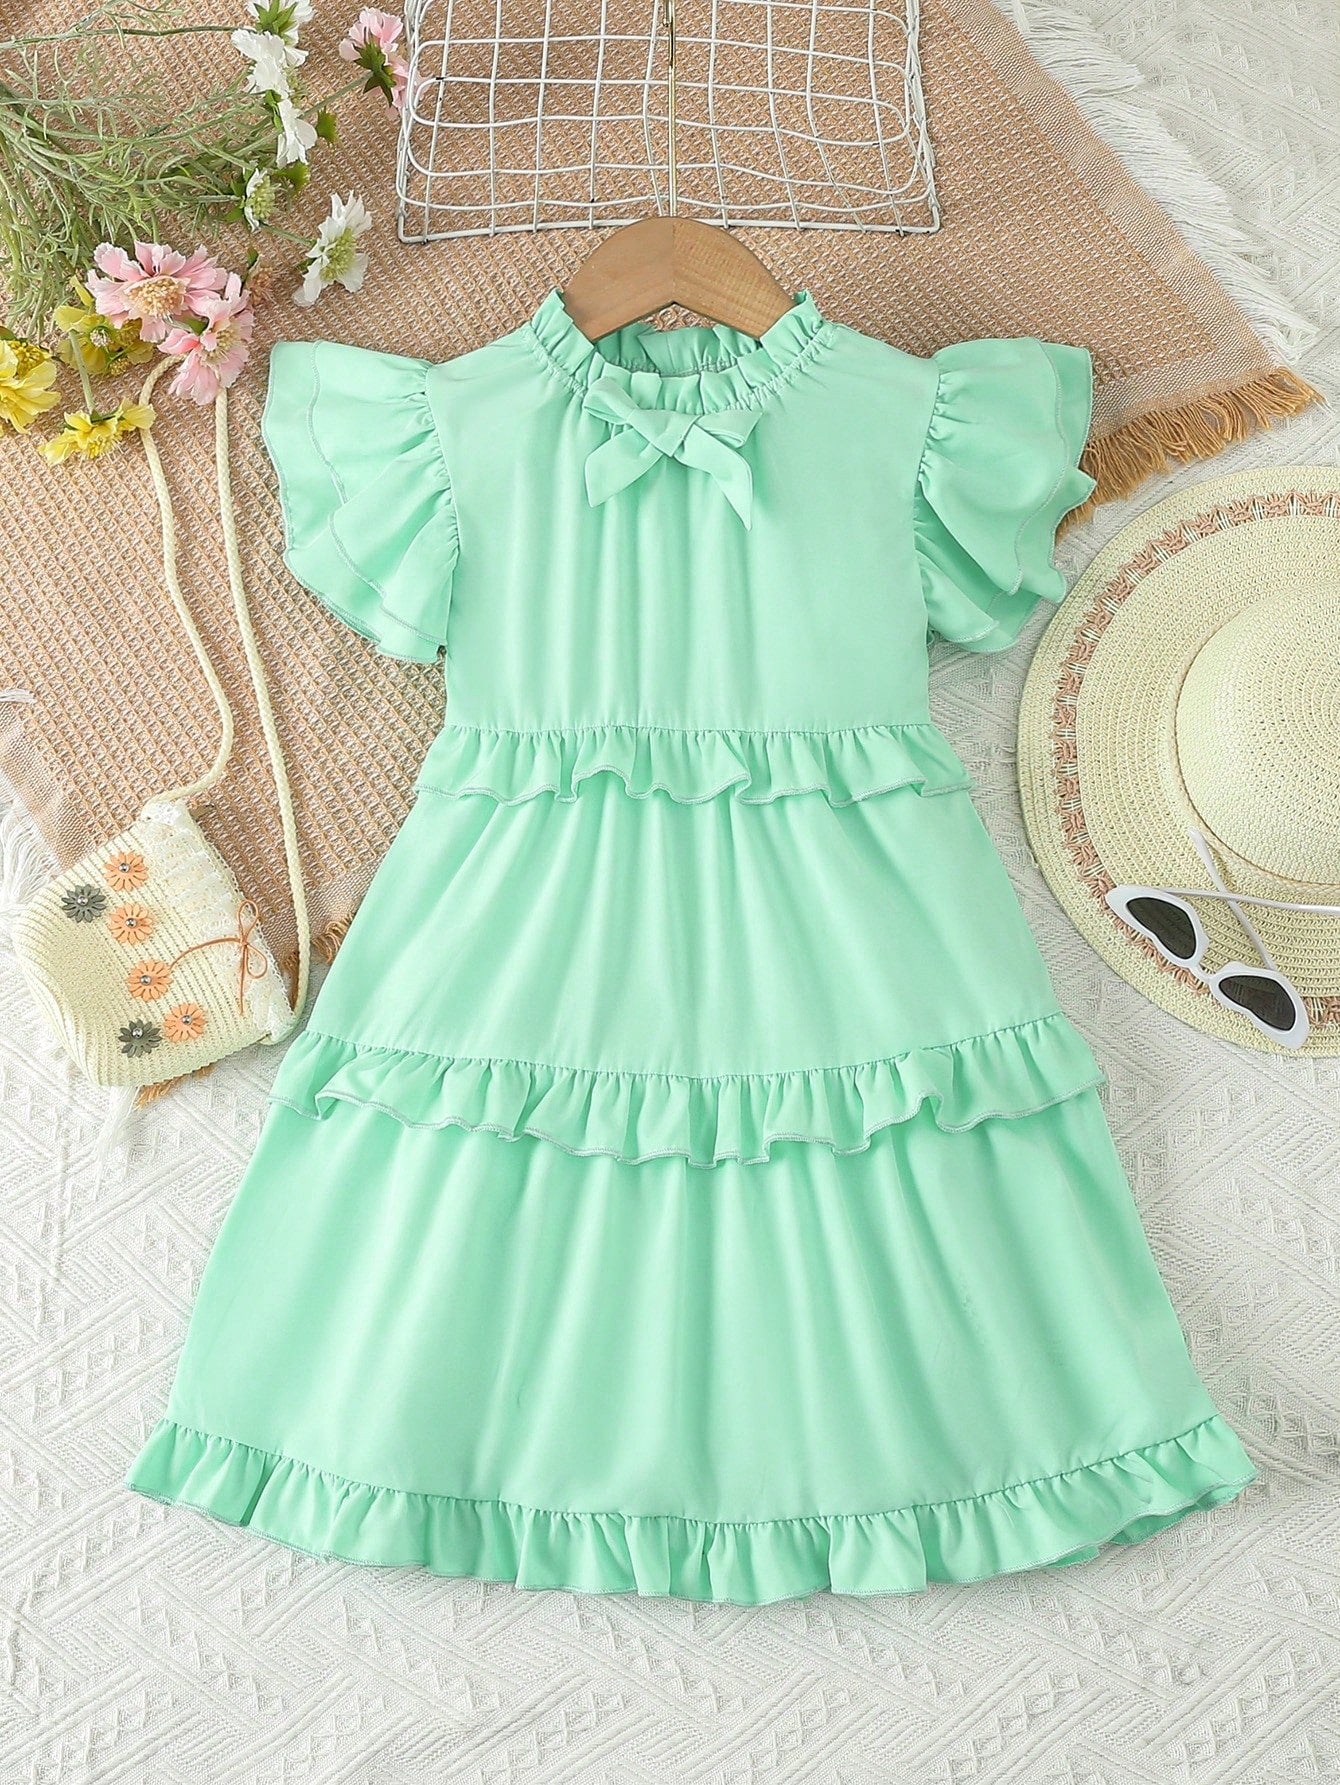 Young Girl's Summer Ladylike Medium Length Cake Dress With Ruffle Neckline, Bow Tie & Butterfly Sleeve Design